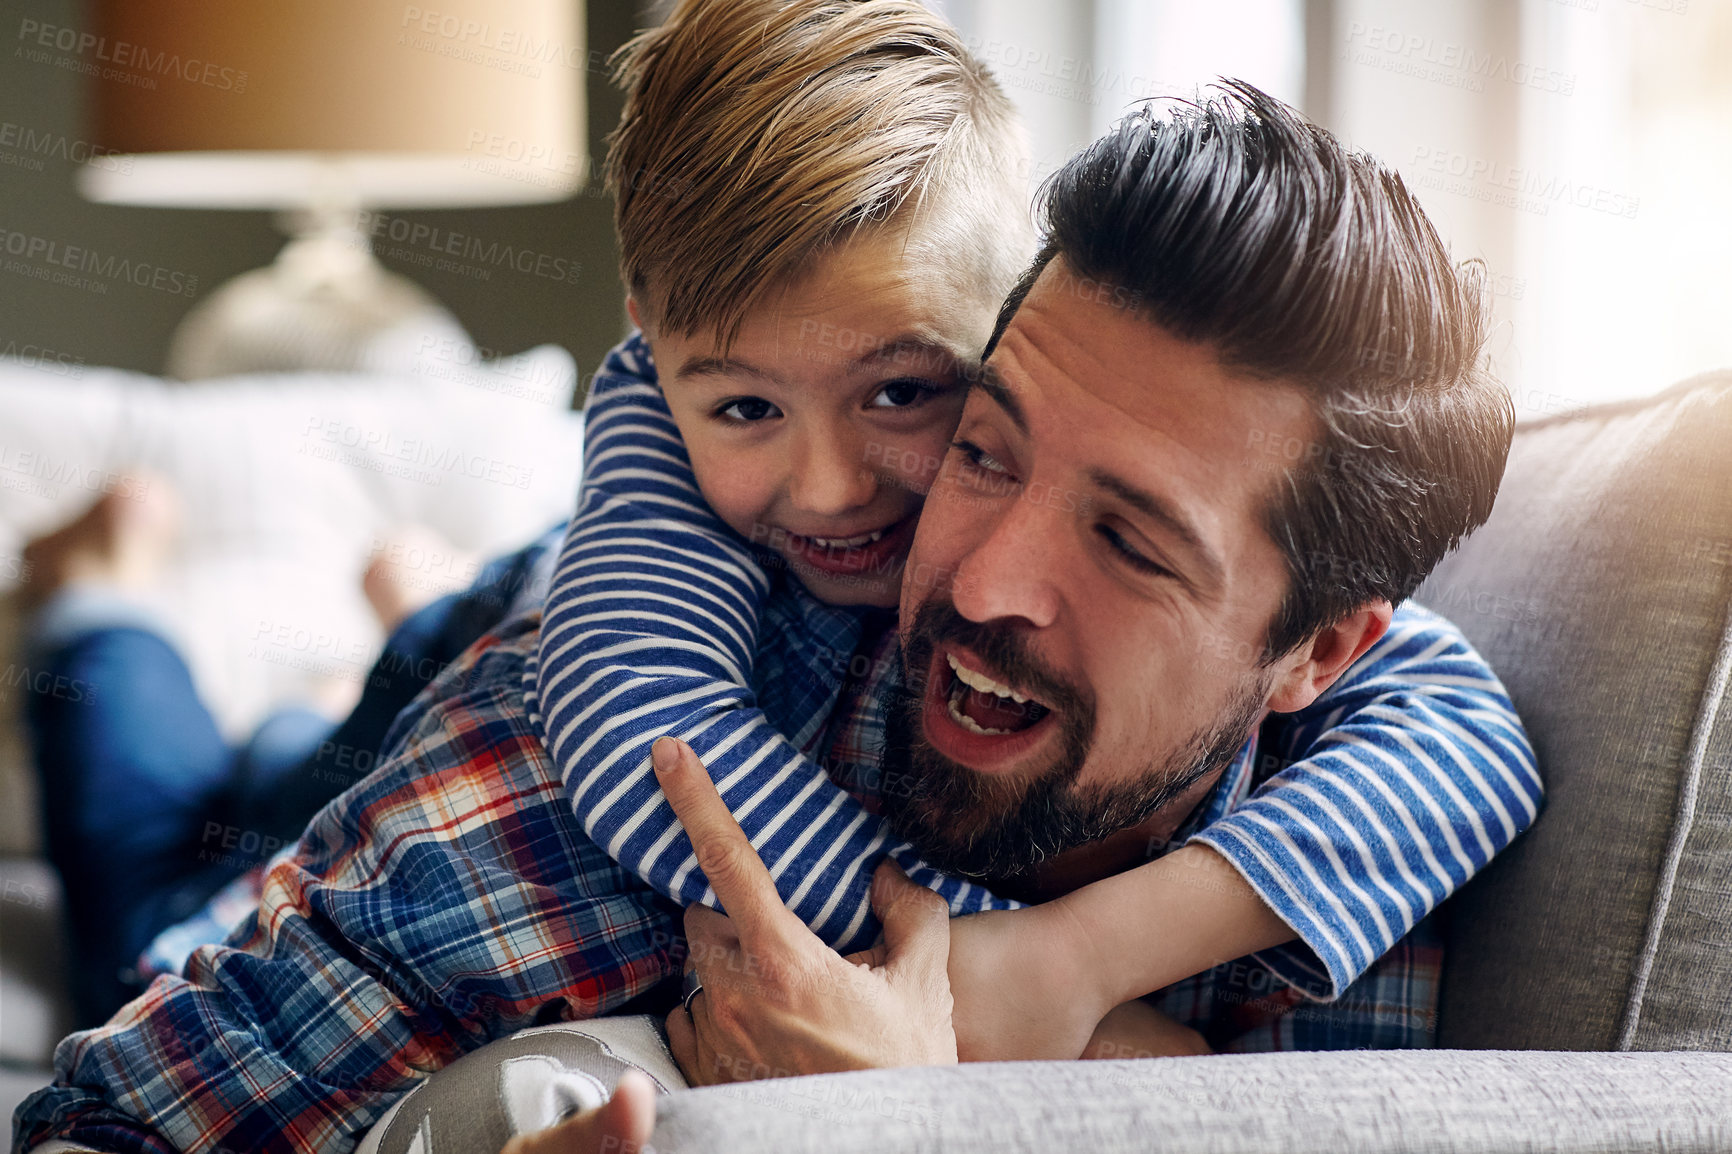 Buy stock photo Shot of a father and his little son bonding together at home